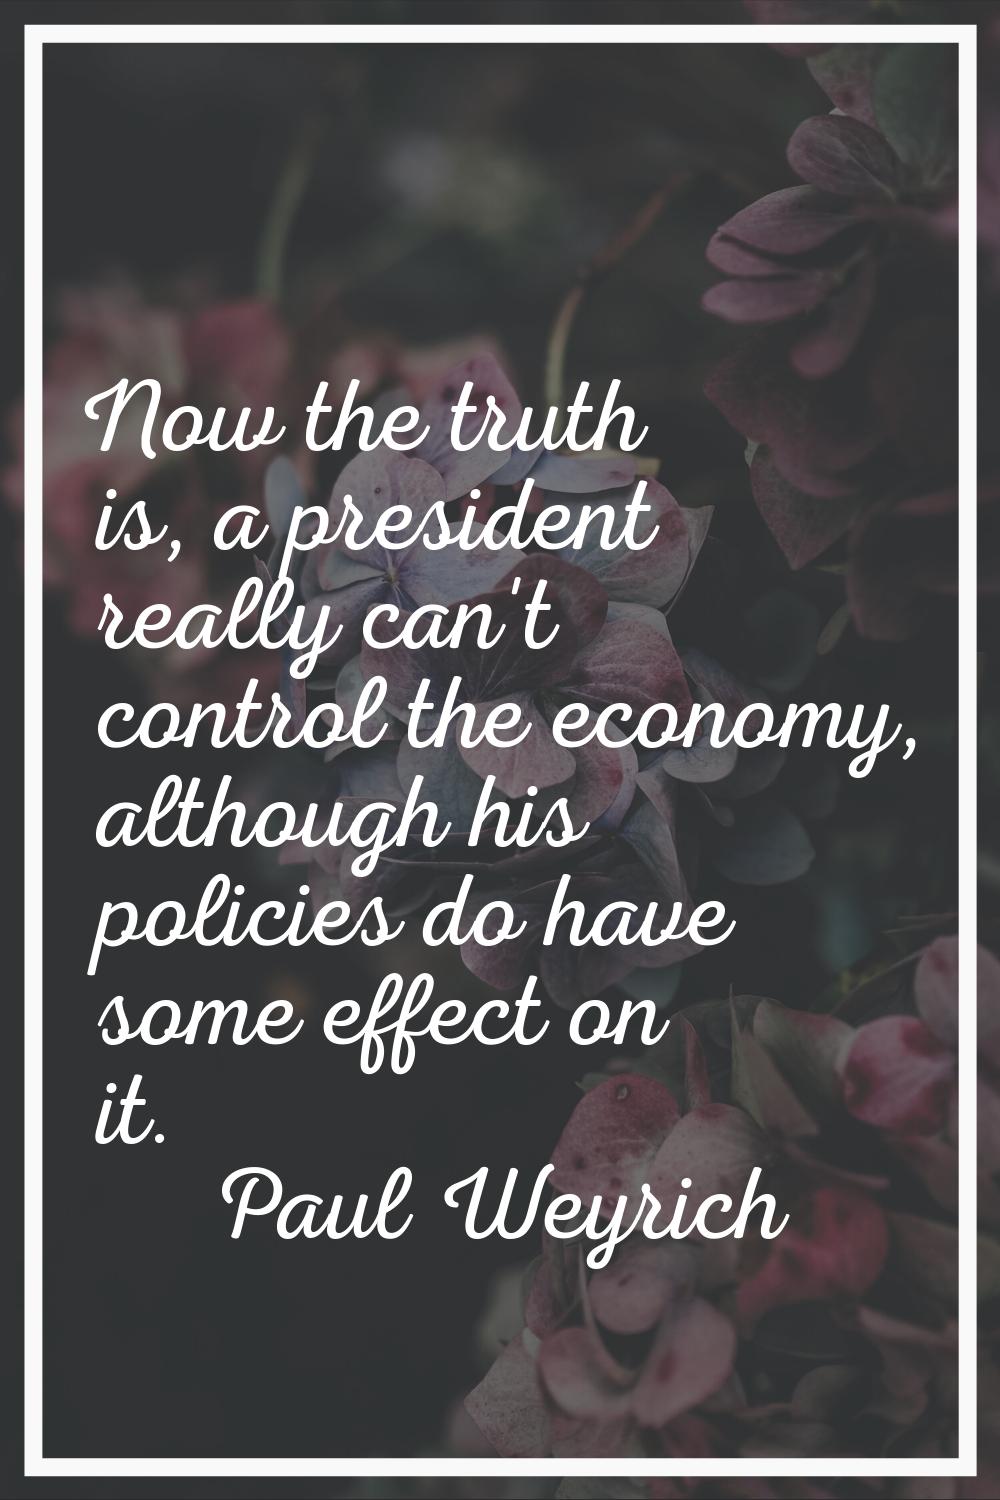 Now the truth is, a president really can't control the economy, although his policies do have some 